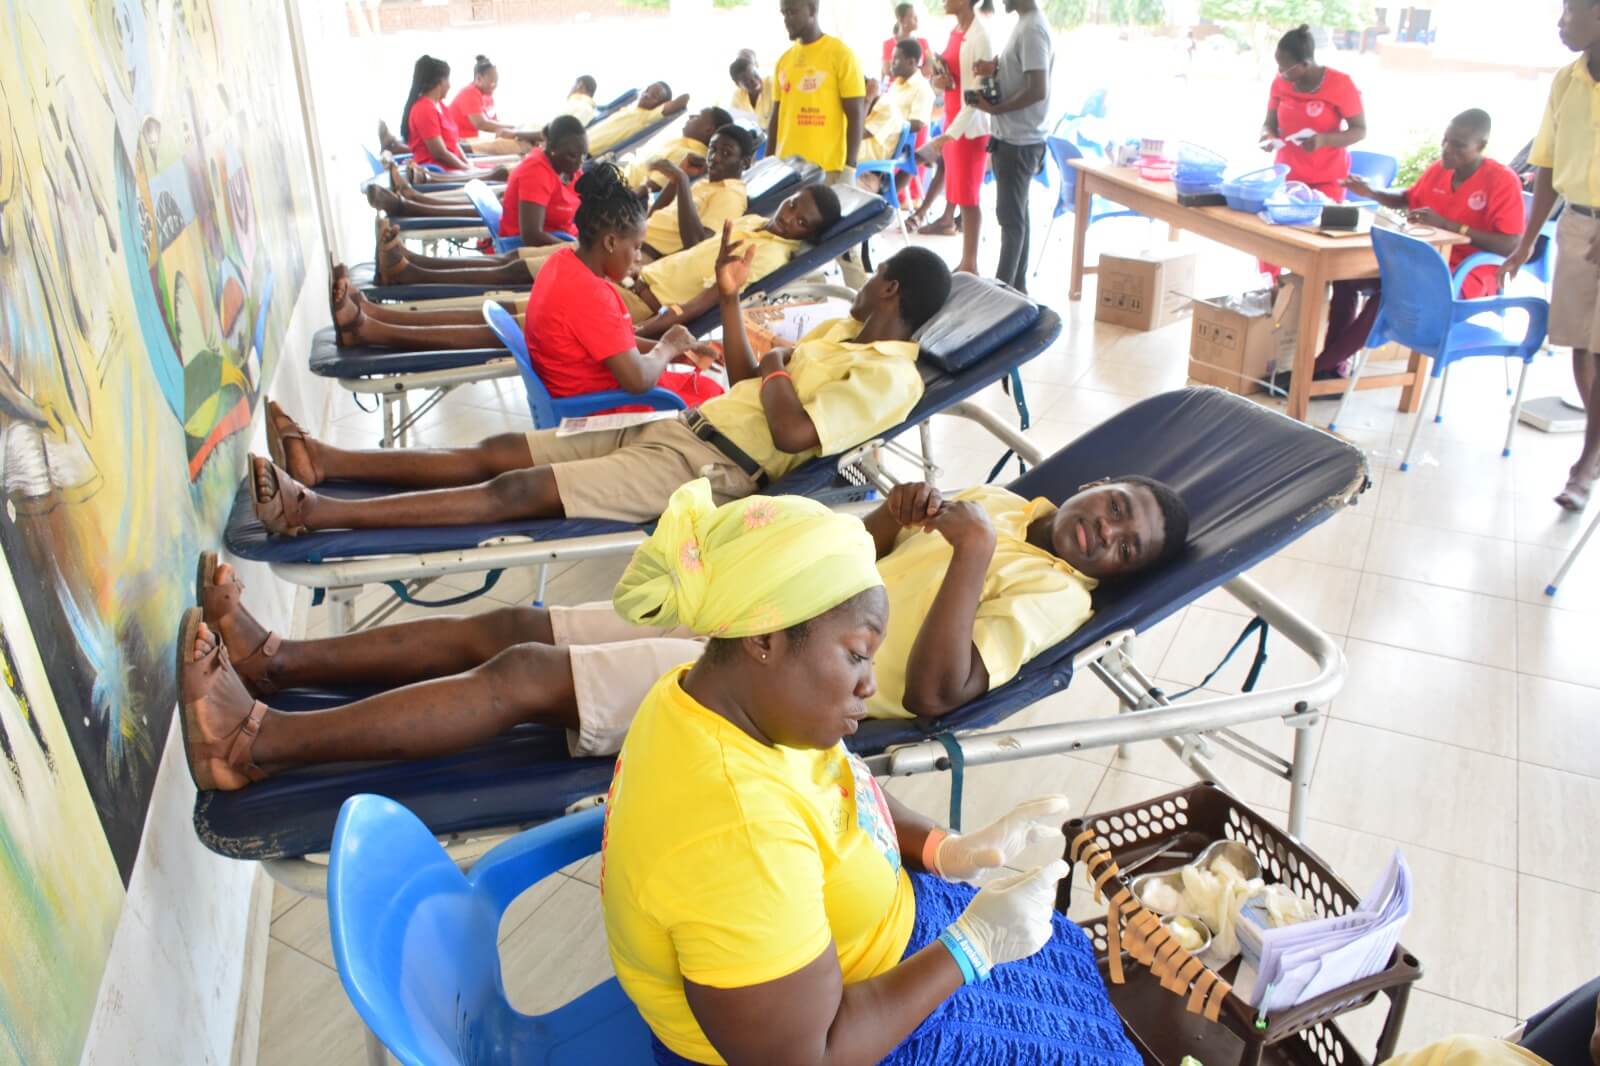 MTN Ghana Foundation Secures 6000 Units of Blood for the National Blood Service in its Annual ‘’Save A Life Campaign’’